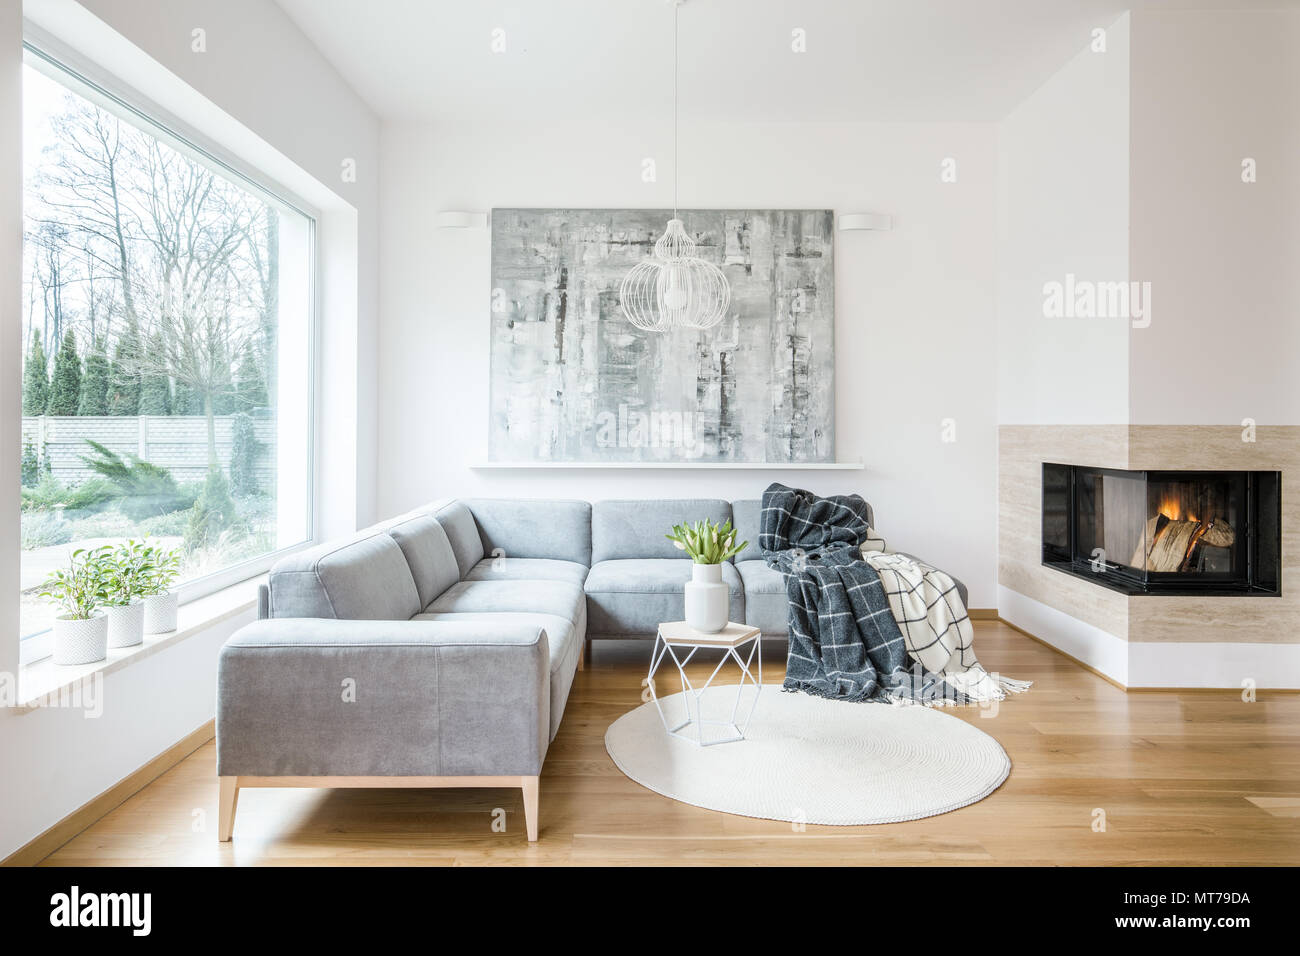 White rug next to a grey corner couch in living room interior with  fireplace and painting Stock Photo - Alamy